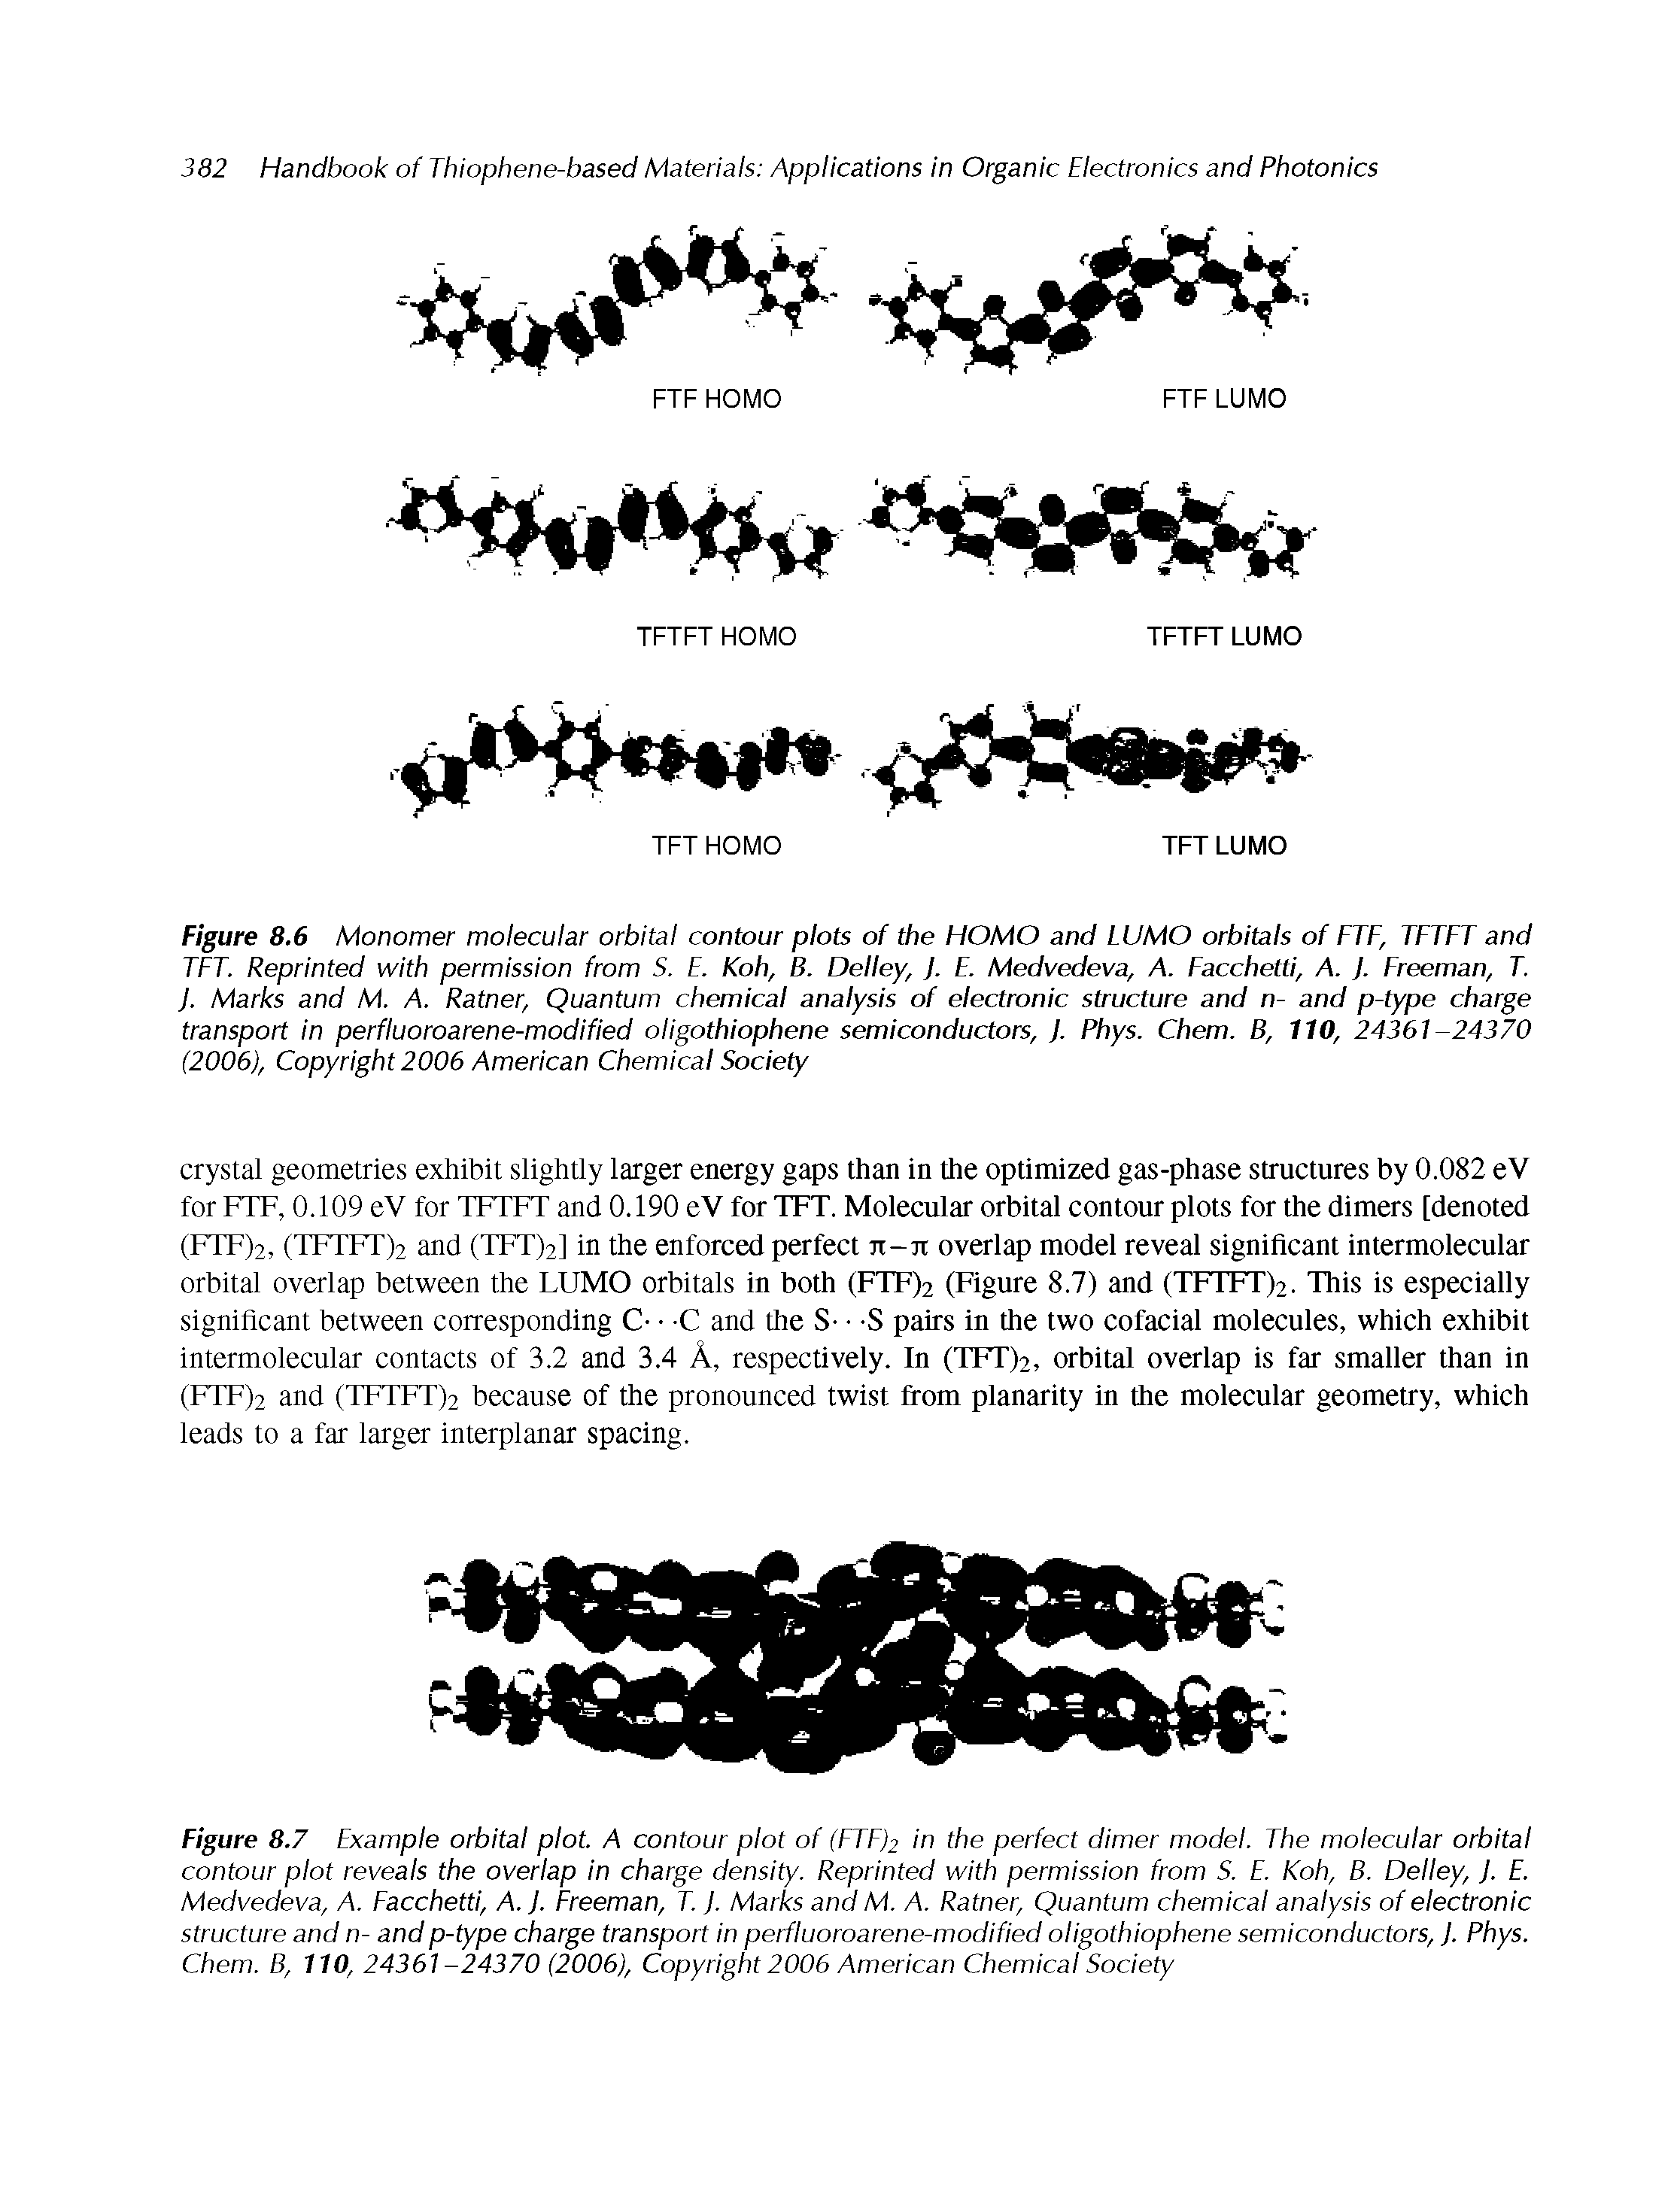 Figure 8,6 Monomer molecular orbital contour plots of the HOMO and LUMO orbitals of FTF, TFTFT and TFT. Reprinted with permission from S. E. Koh, B. Delley, J. E. Medvedeva, A. Facchetti, A. J. Freeman, T. J. Marks and M. A. Ratner, Quantum chemical analysis of electronic structure and n- and p-type charge transport in perfluoroarene-modified oligothiophene semiconductors, J. Phys. Chem. B, 110, 24361 24370 (2006), Copyright 2006 American Chemical Society...